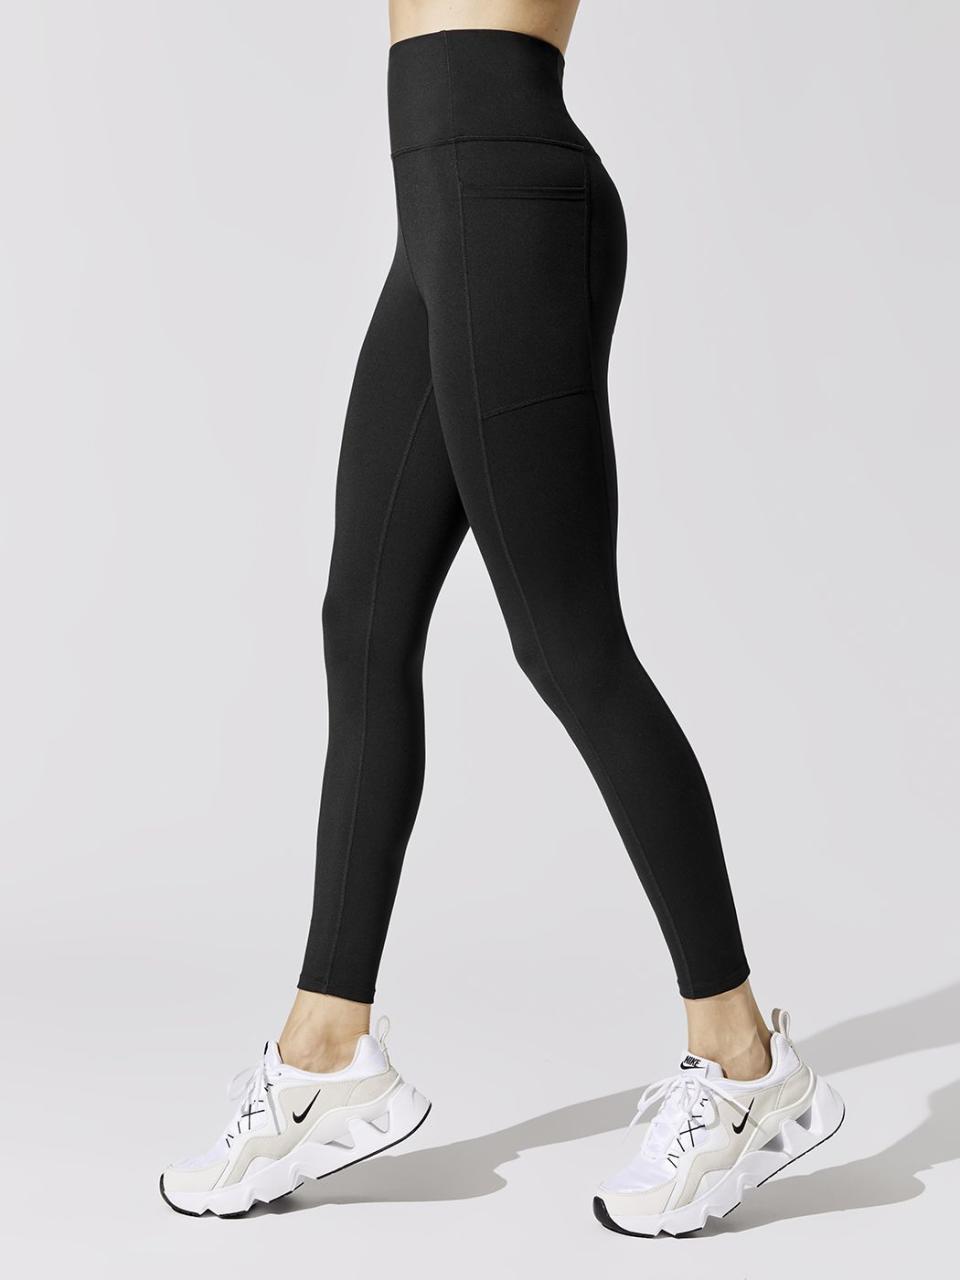 8) High Rise Full-Length Legging With Pockets In Cloud Compression